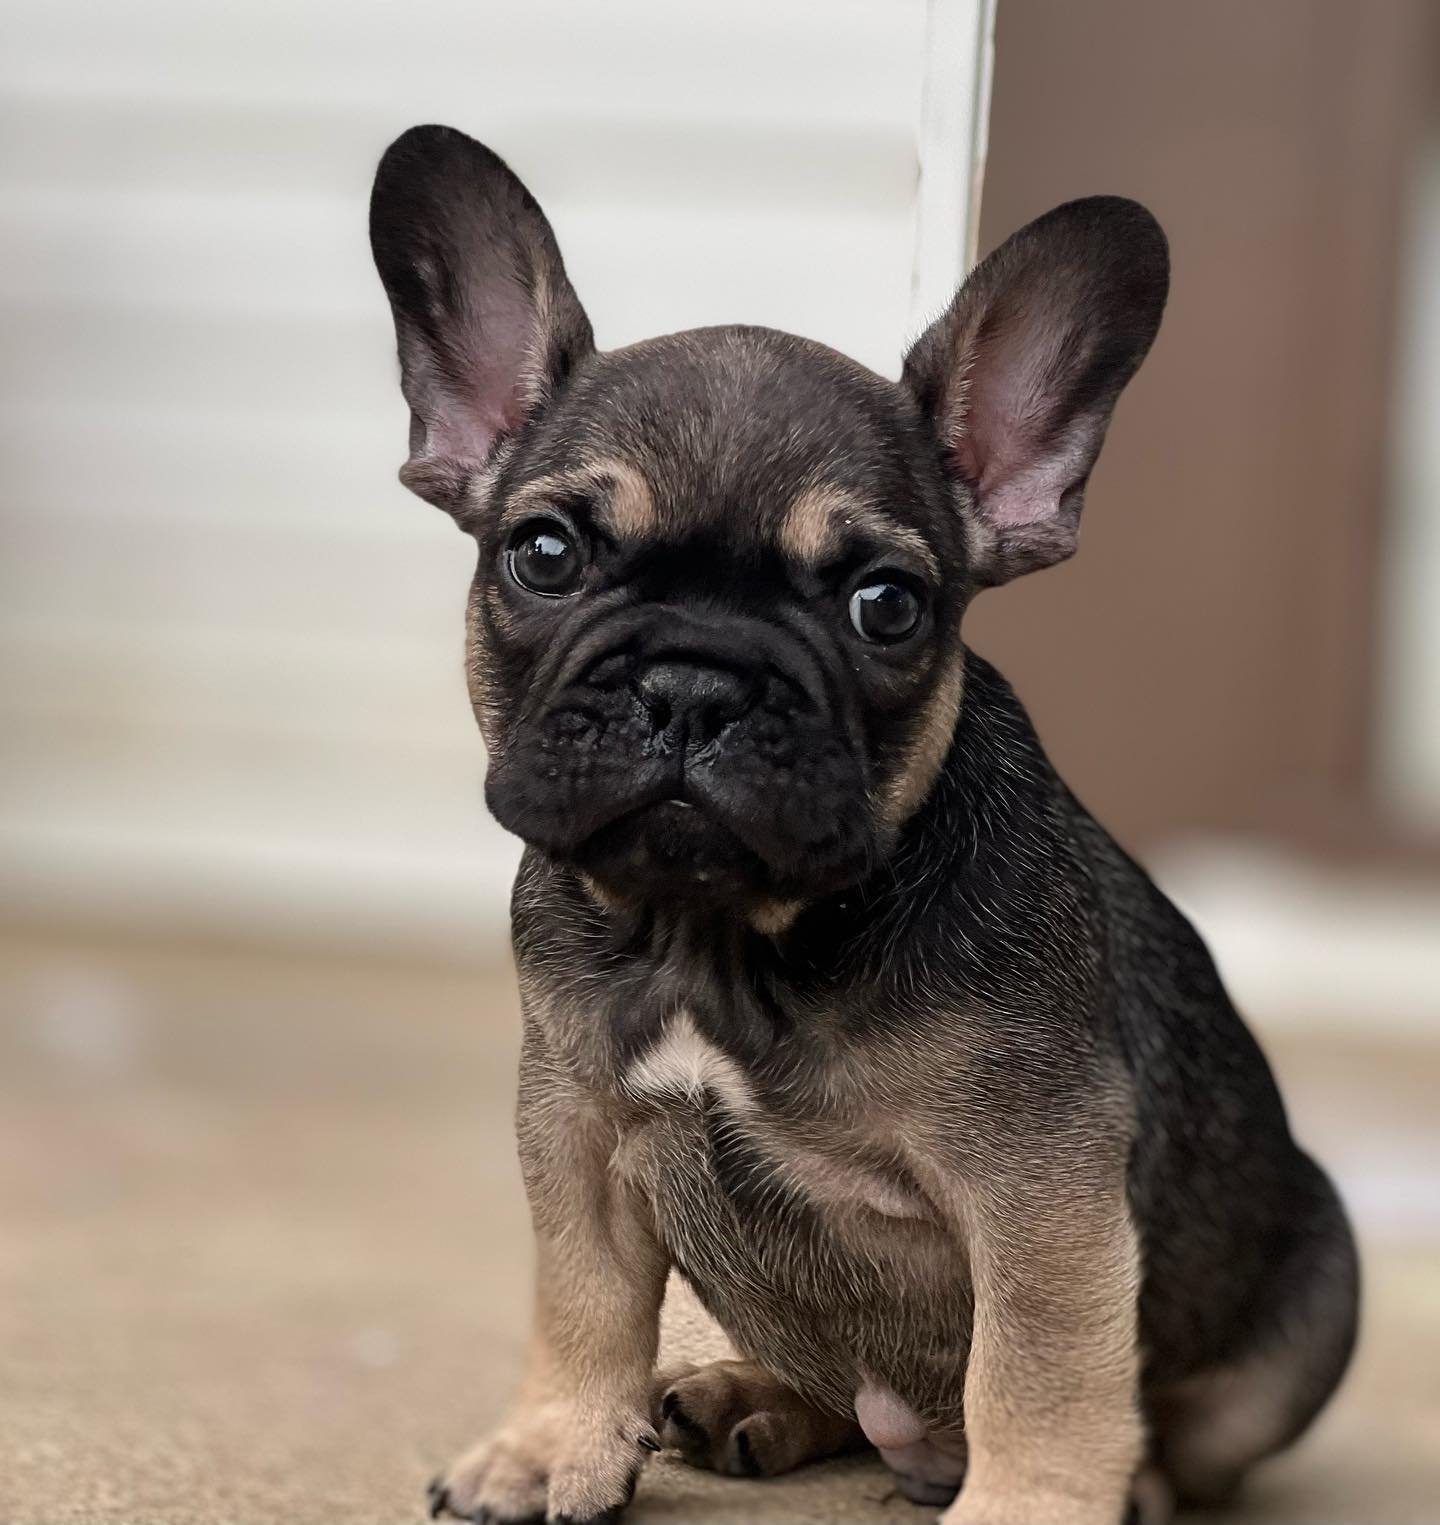 Can you even stand the sweetness on that face?! &ldquo;Groundhog&rdquo; needs a lush green pasture to call his own 🌾🌾 #FrenchiePuppyForSale #FrenchBulldogPuppyForSale #FrenchiePuppy #FrenchBulldogPuppy #SableFrenchie #SableFrenchiePuppy #drewdogs